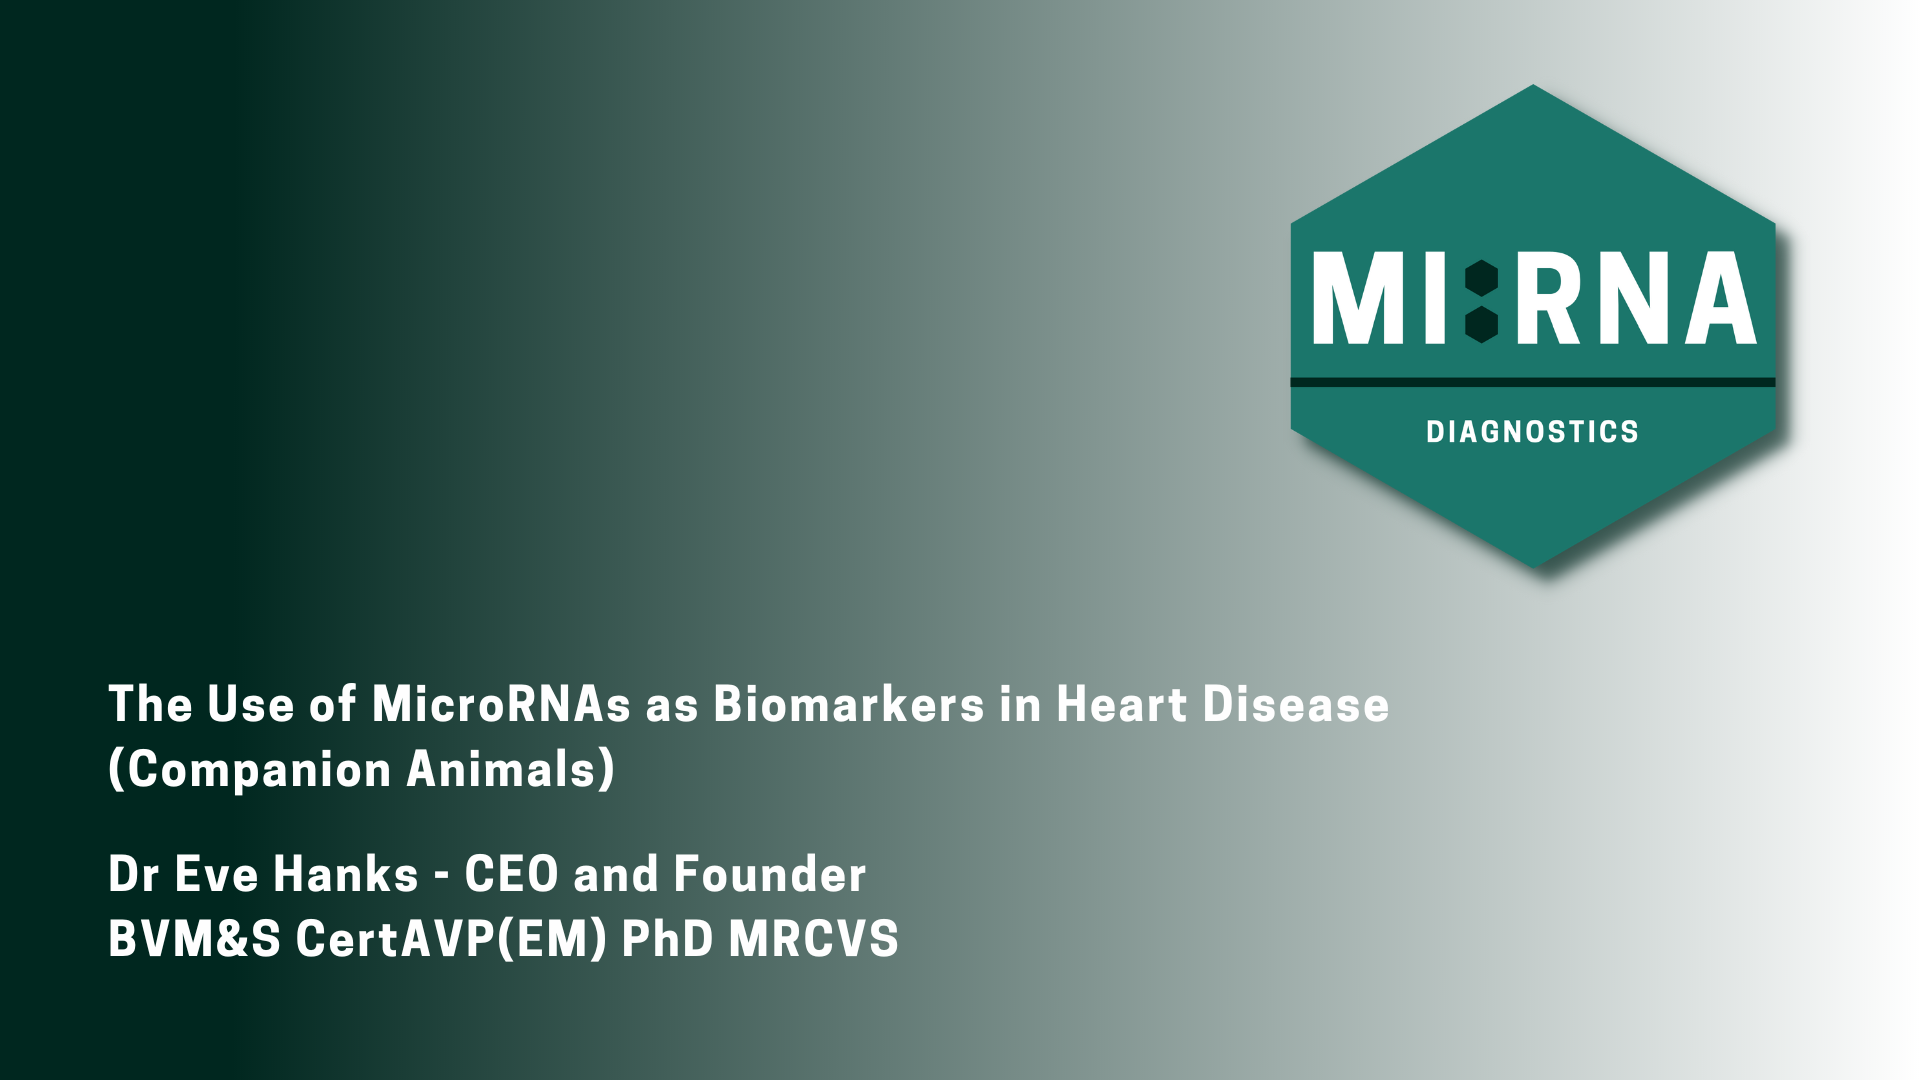 The Use of MicroRNAs as Biomarkers in Heart Disease (Companion Animals) - 1 hour CPD